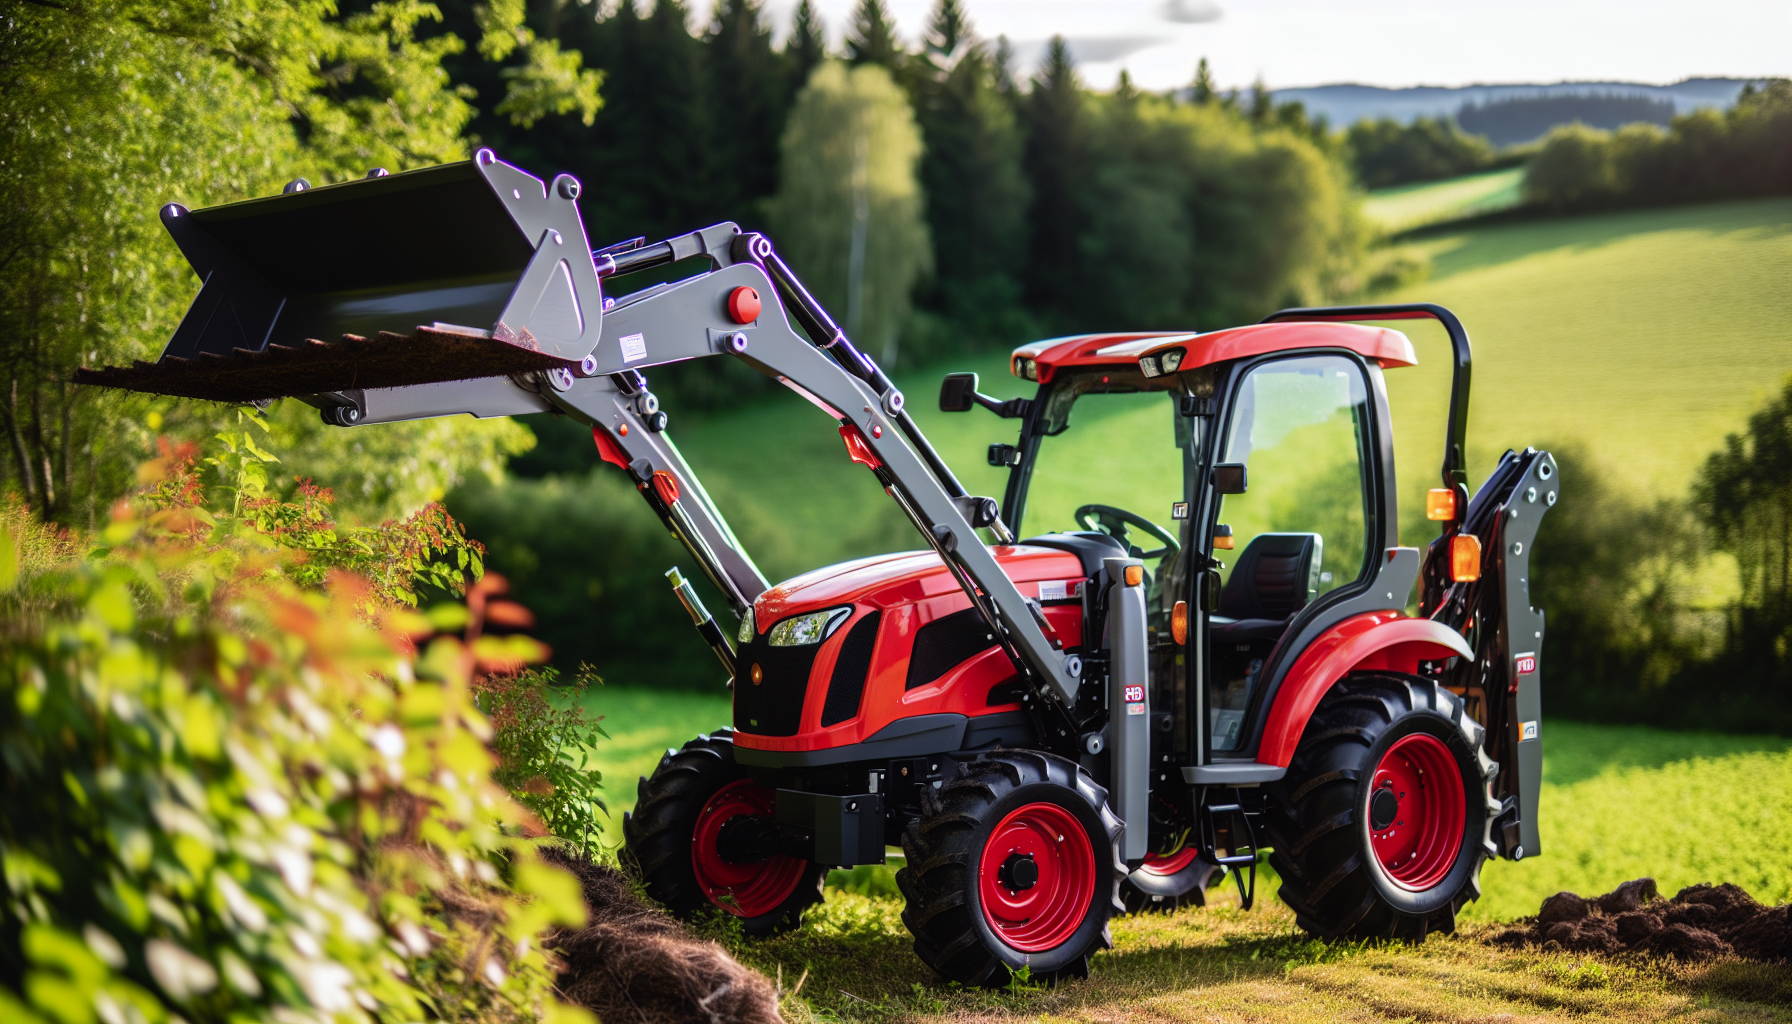 Compact tractor with front end loader attachment